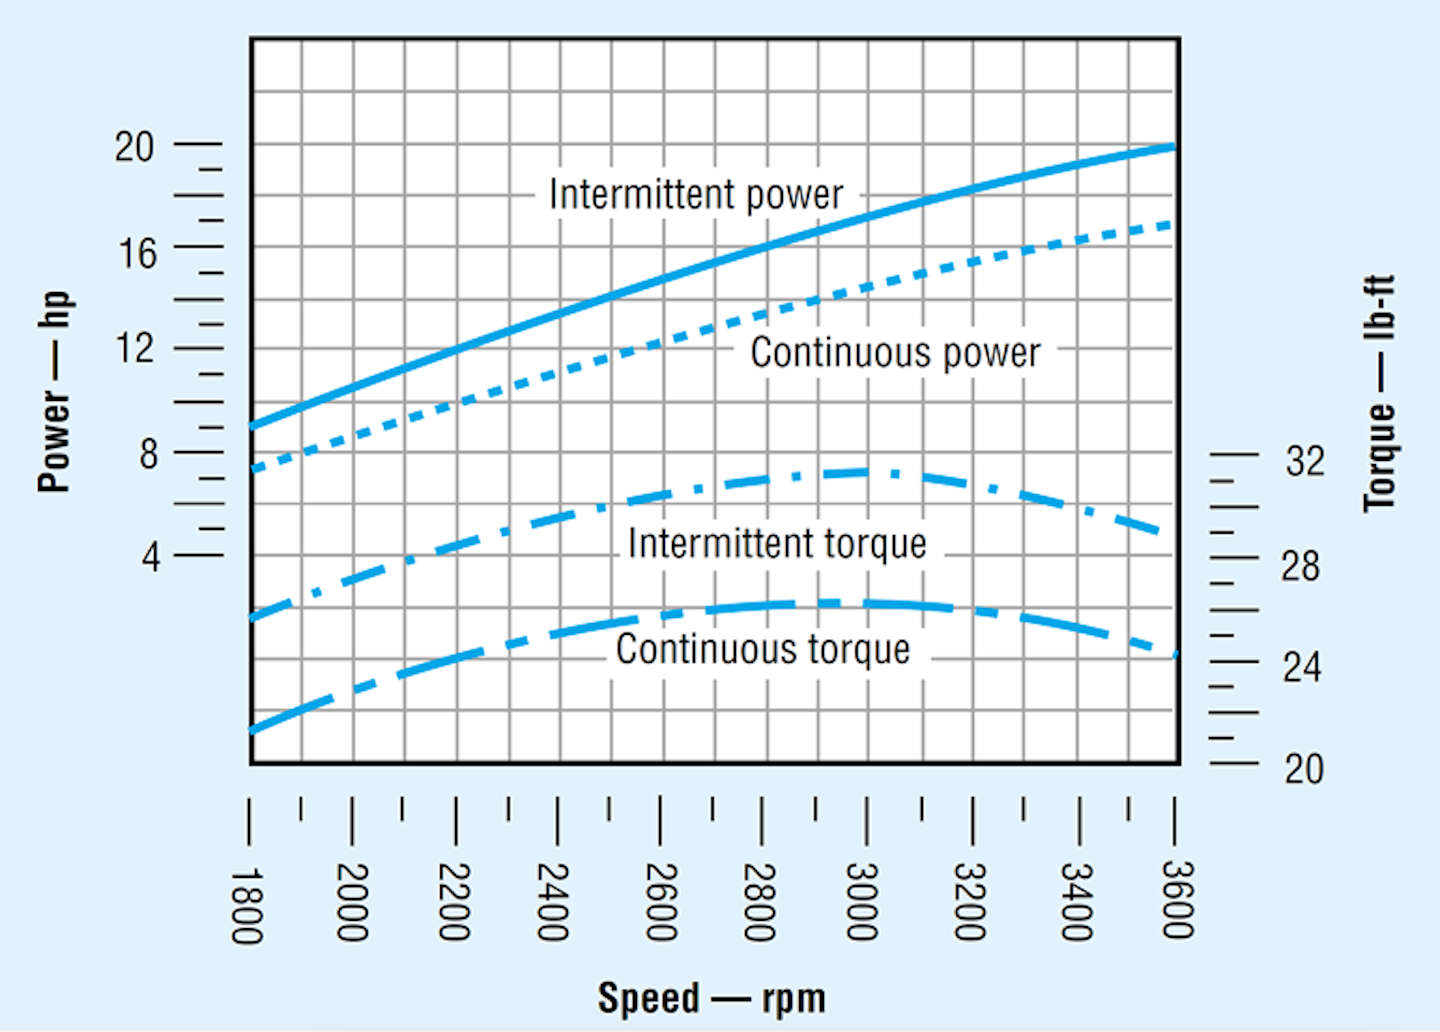 4. The torque-speed curve for an internal combustion engine is much more linear than that for an electric motor. This illustrates that to provide the torque to drive a hydraulic pump at low speeds, gas and diesel engines must have a higher power capacity than an electric motor for driving the same pump.